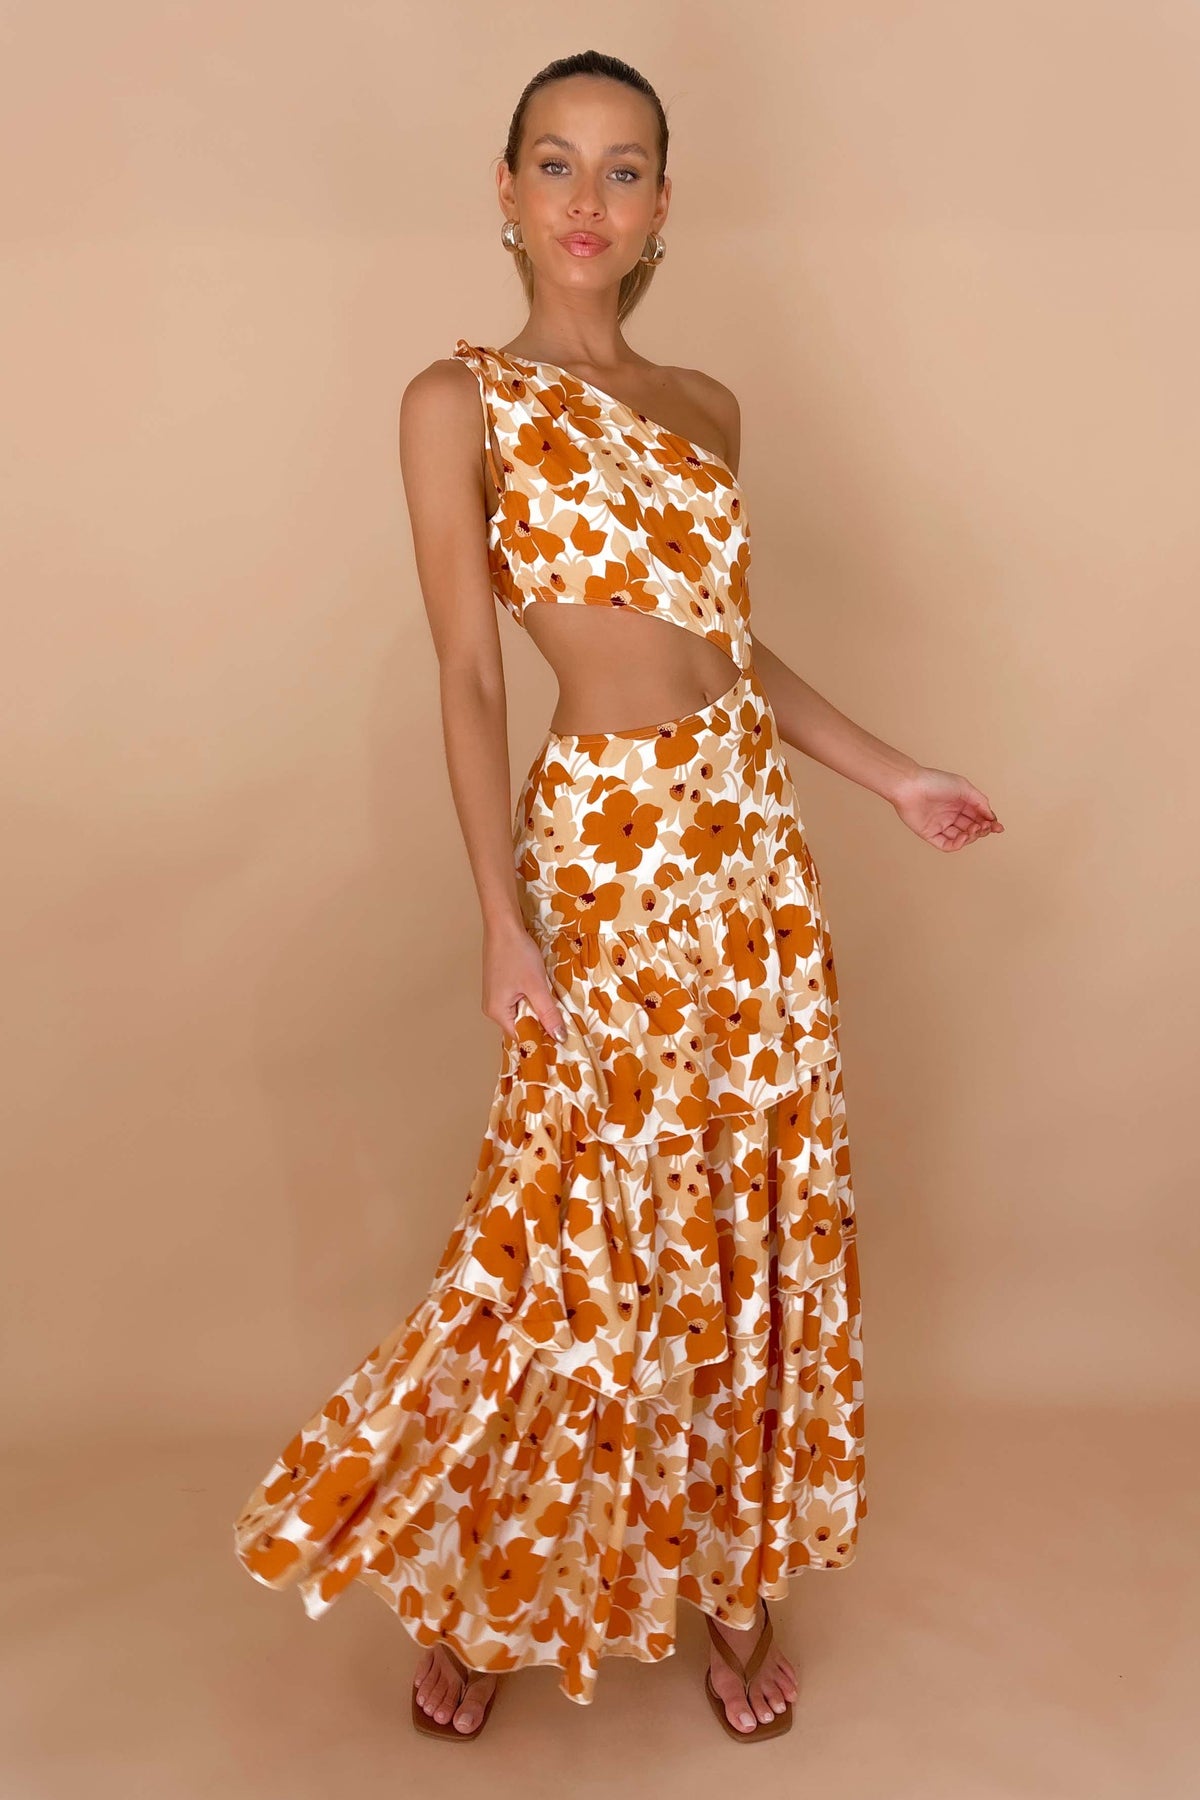 Autumn Night Dress, BROWN, COTTON &amp; POLYESTER, COTTON AND POLYESTER, DRESS, DRESSES, FLORAL, FLORALS, MAXI DRESS, MIDI DRESS, ONE SHOULDER, POLYESTER AND COTTON, , -MISHKAH